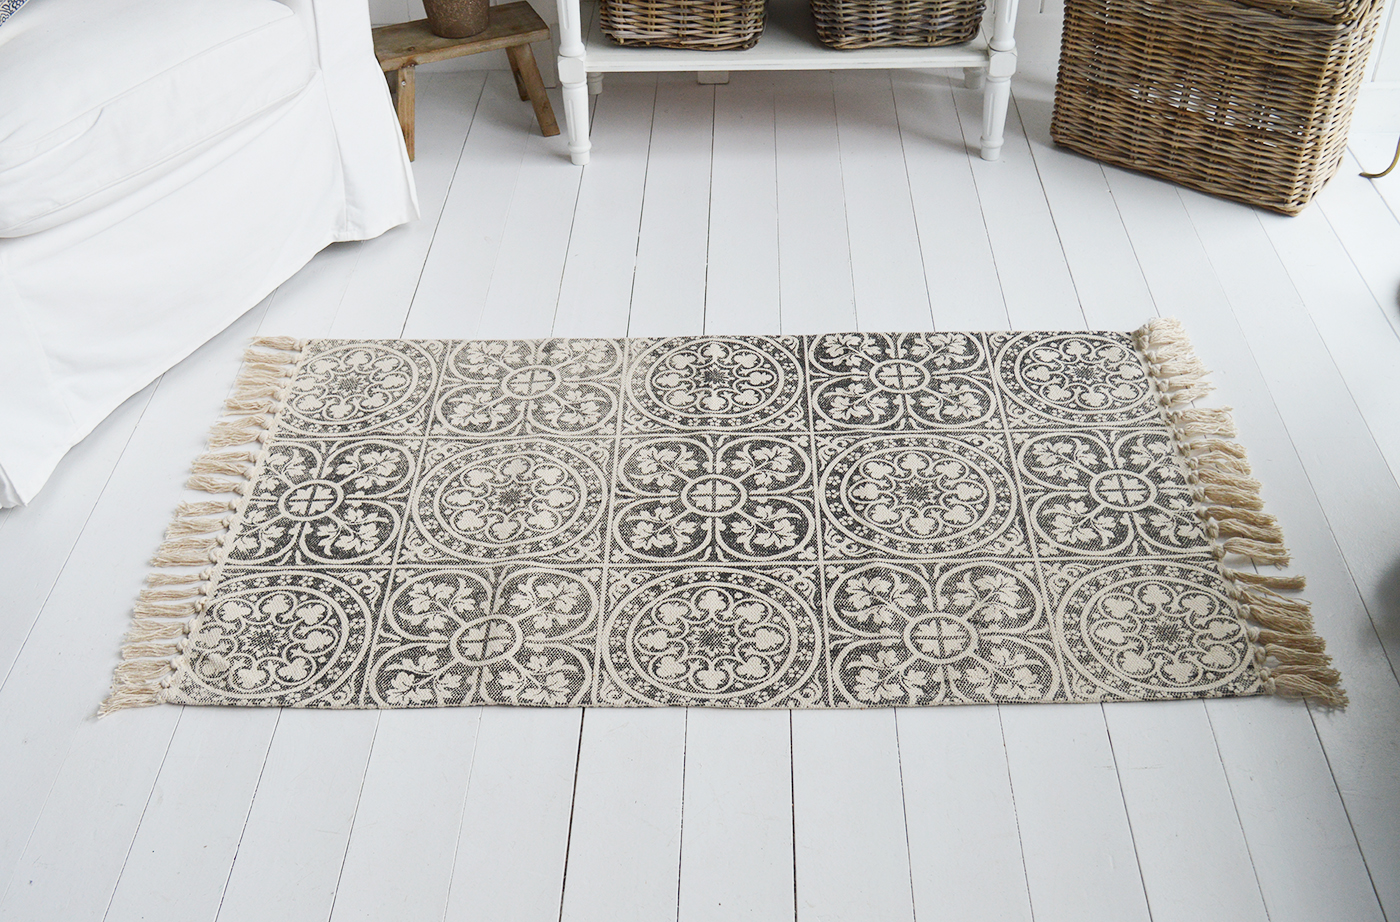 Hamptons rug in bold grey tapestry design on a linen background for New England country, coastal and modern farmhouse interiors to complement furniture from The White Lighthouse